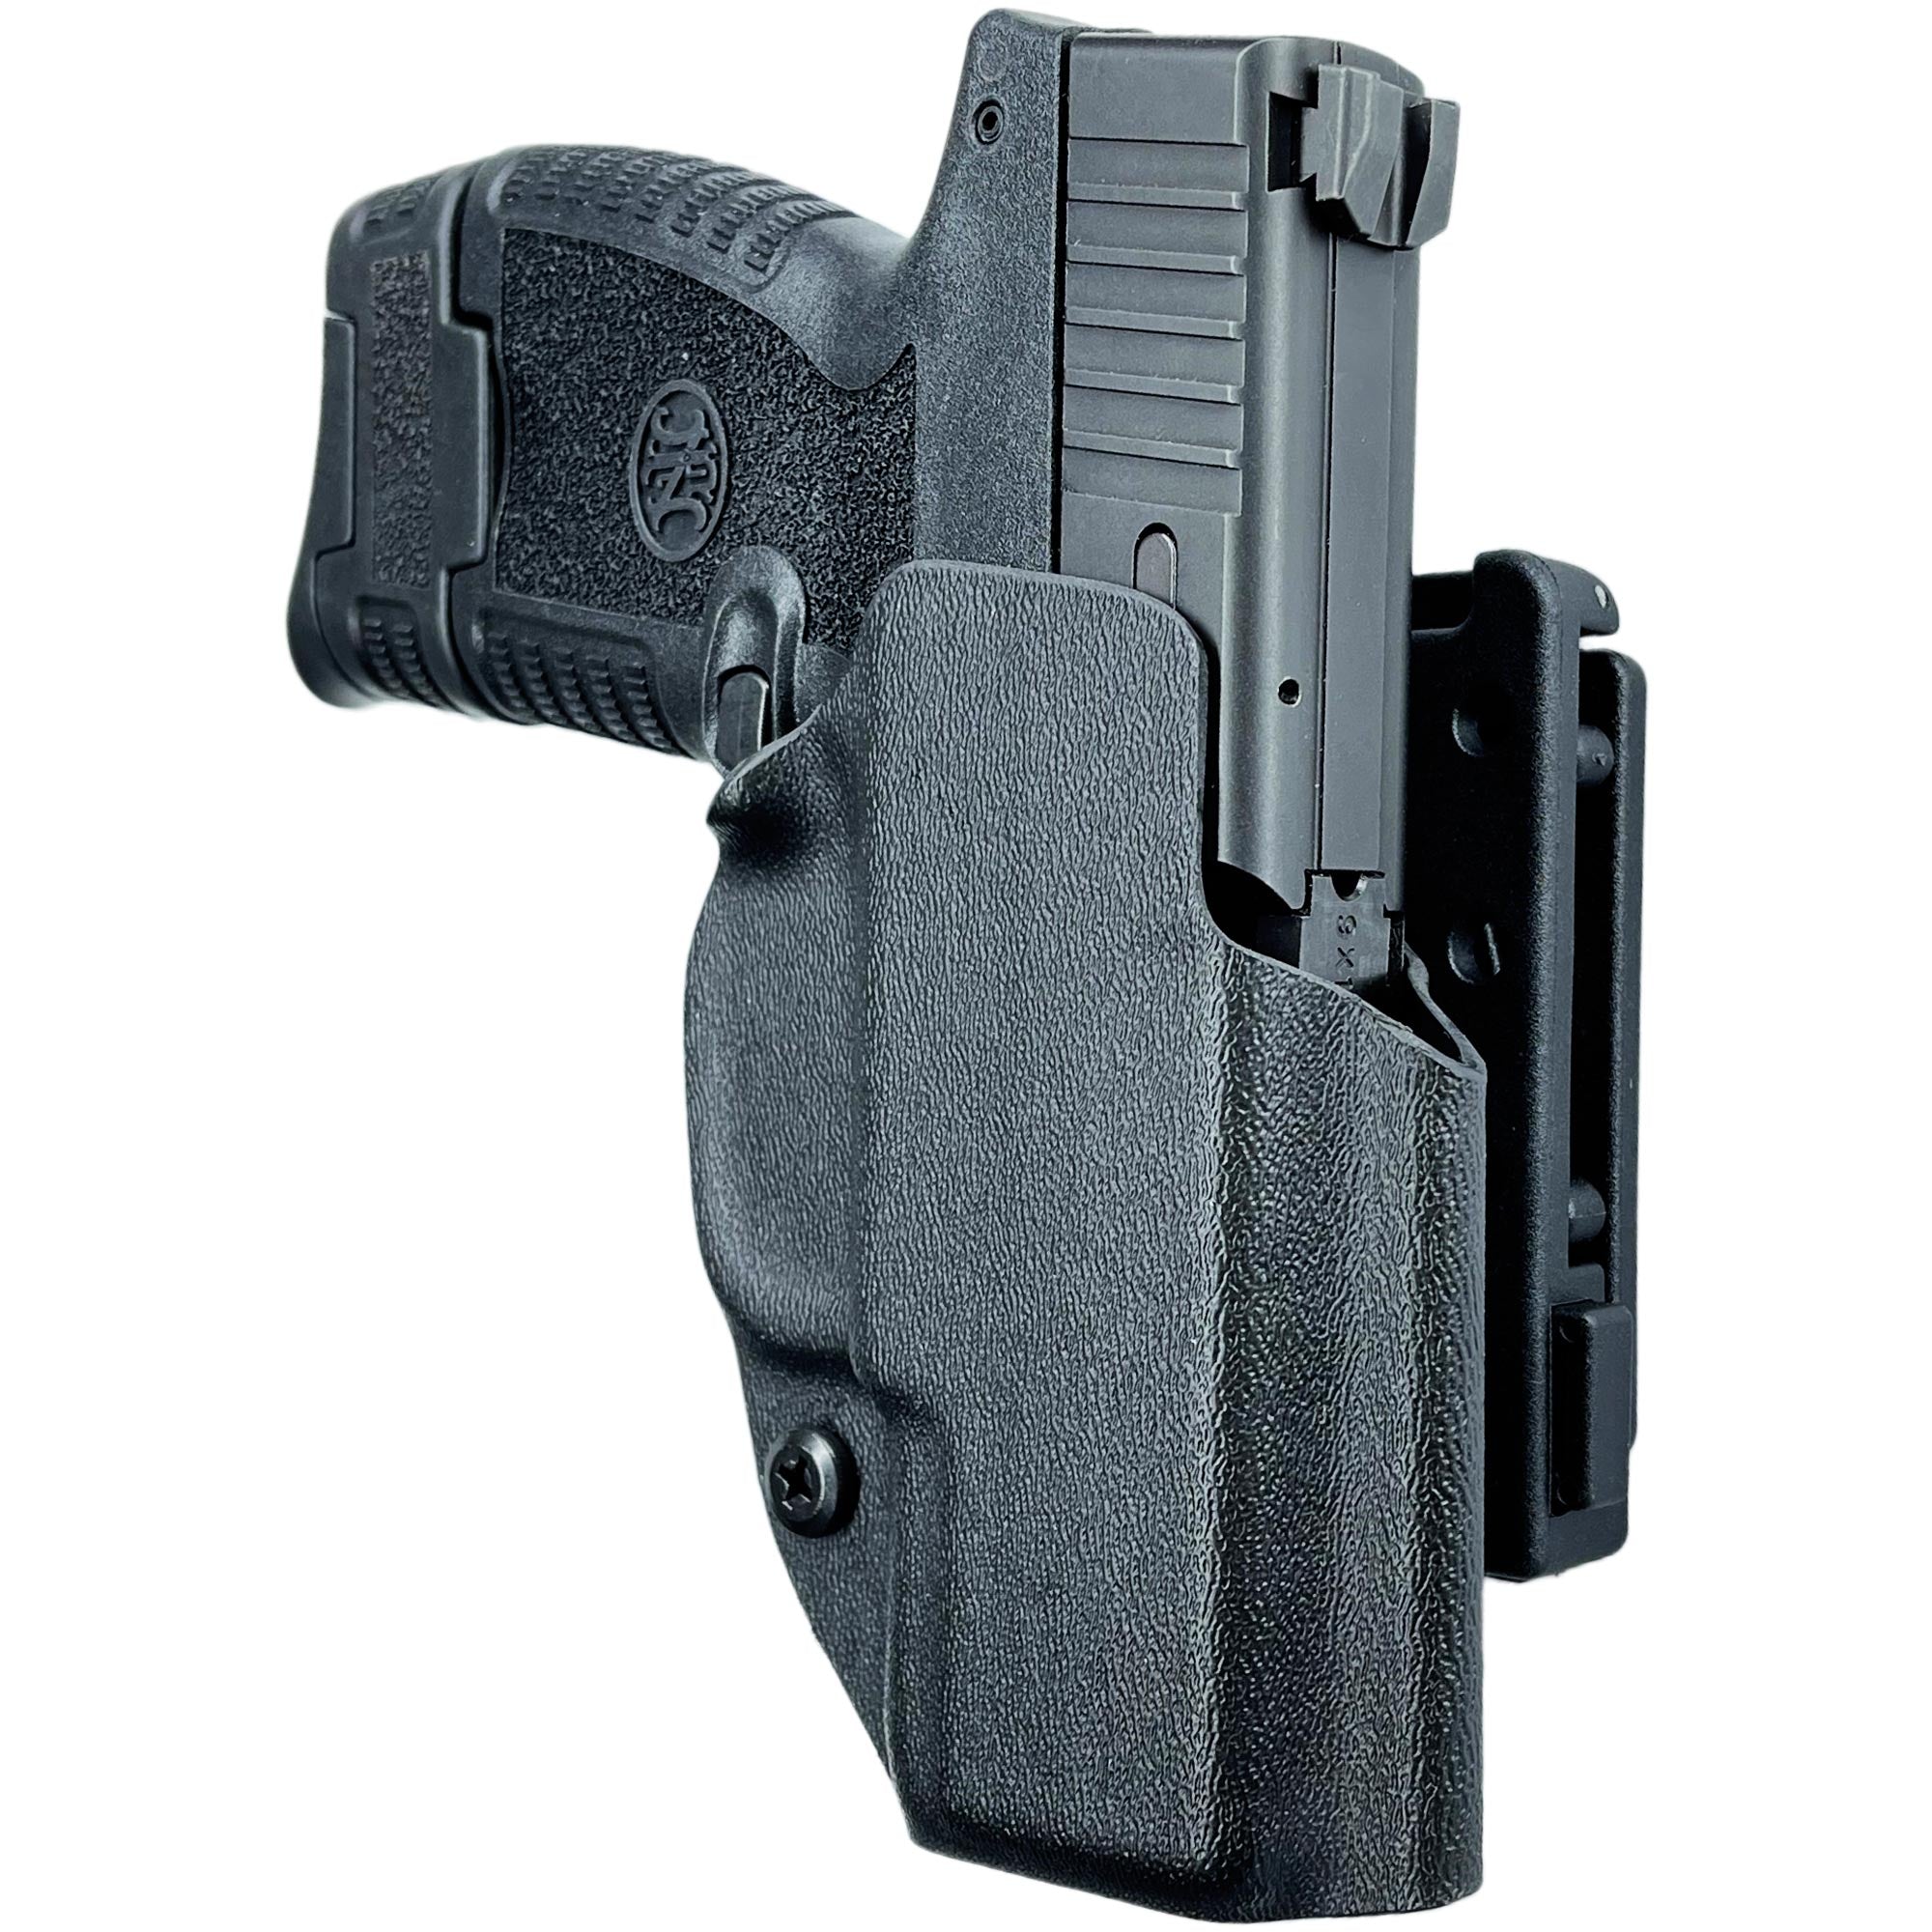 Pro IDPA Competition Holster for FN 503 - Black 1